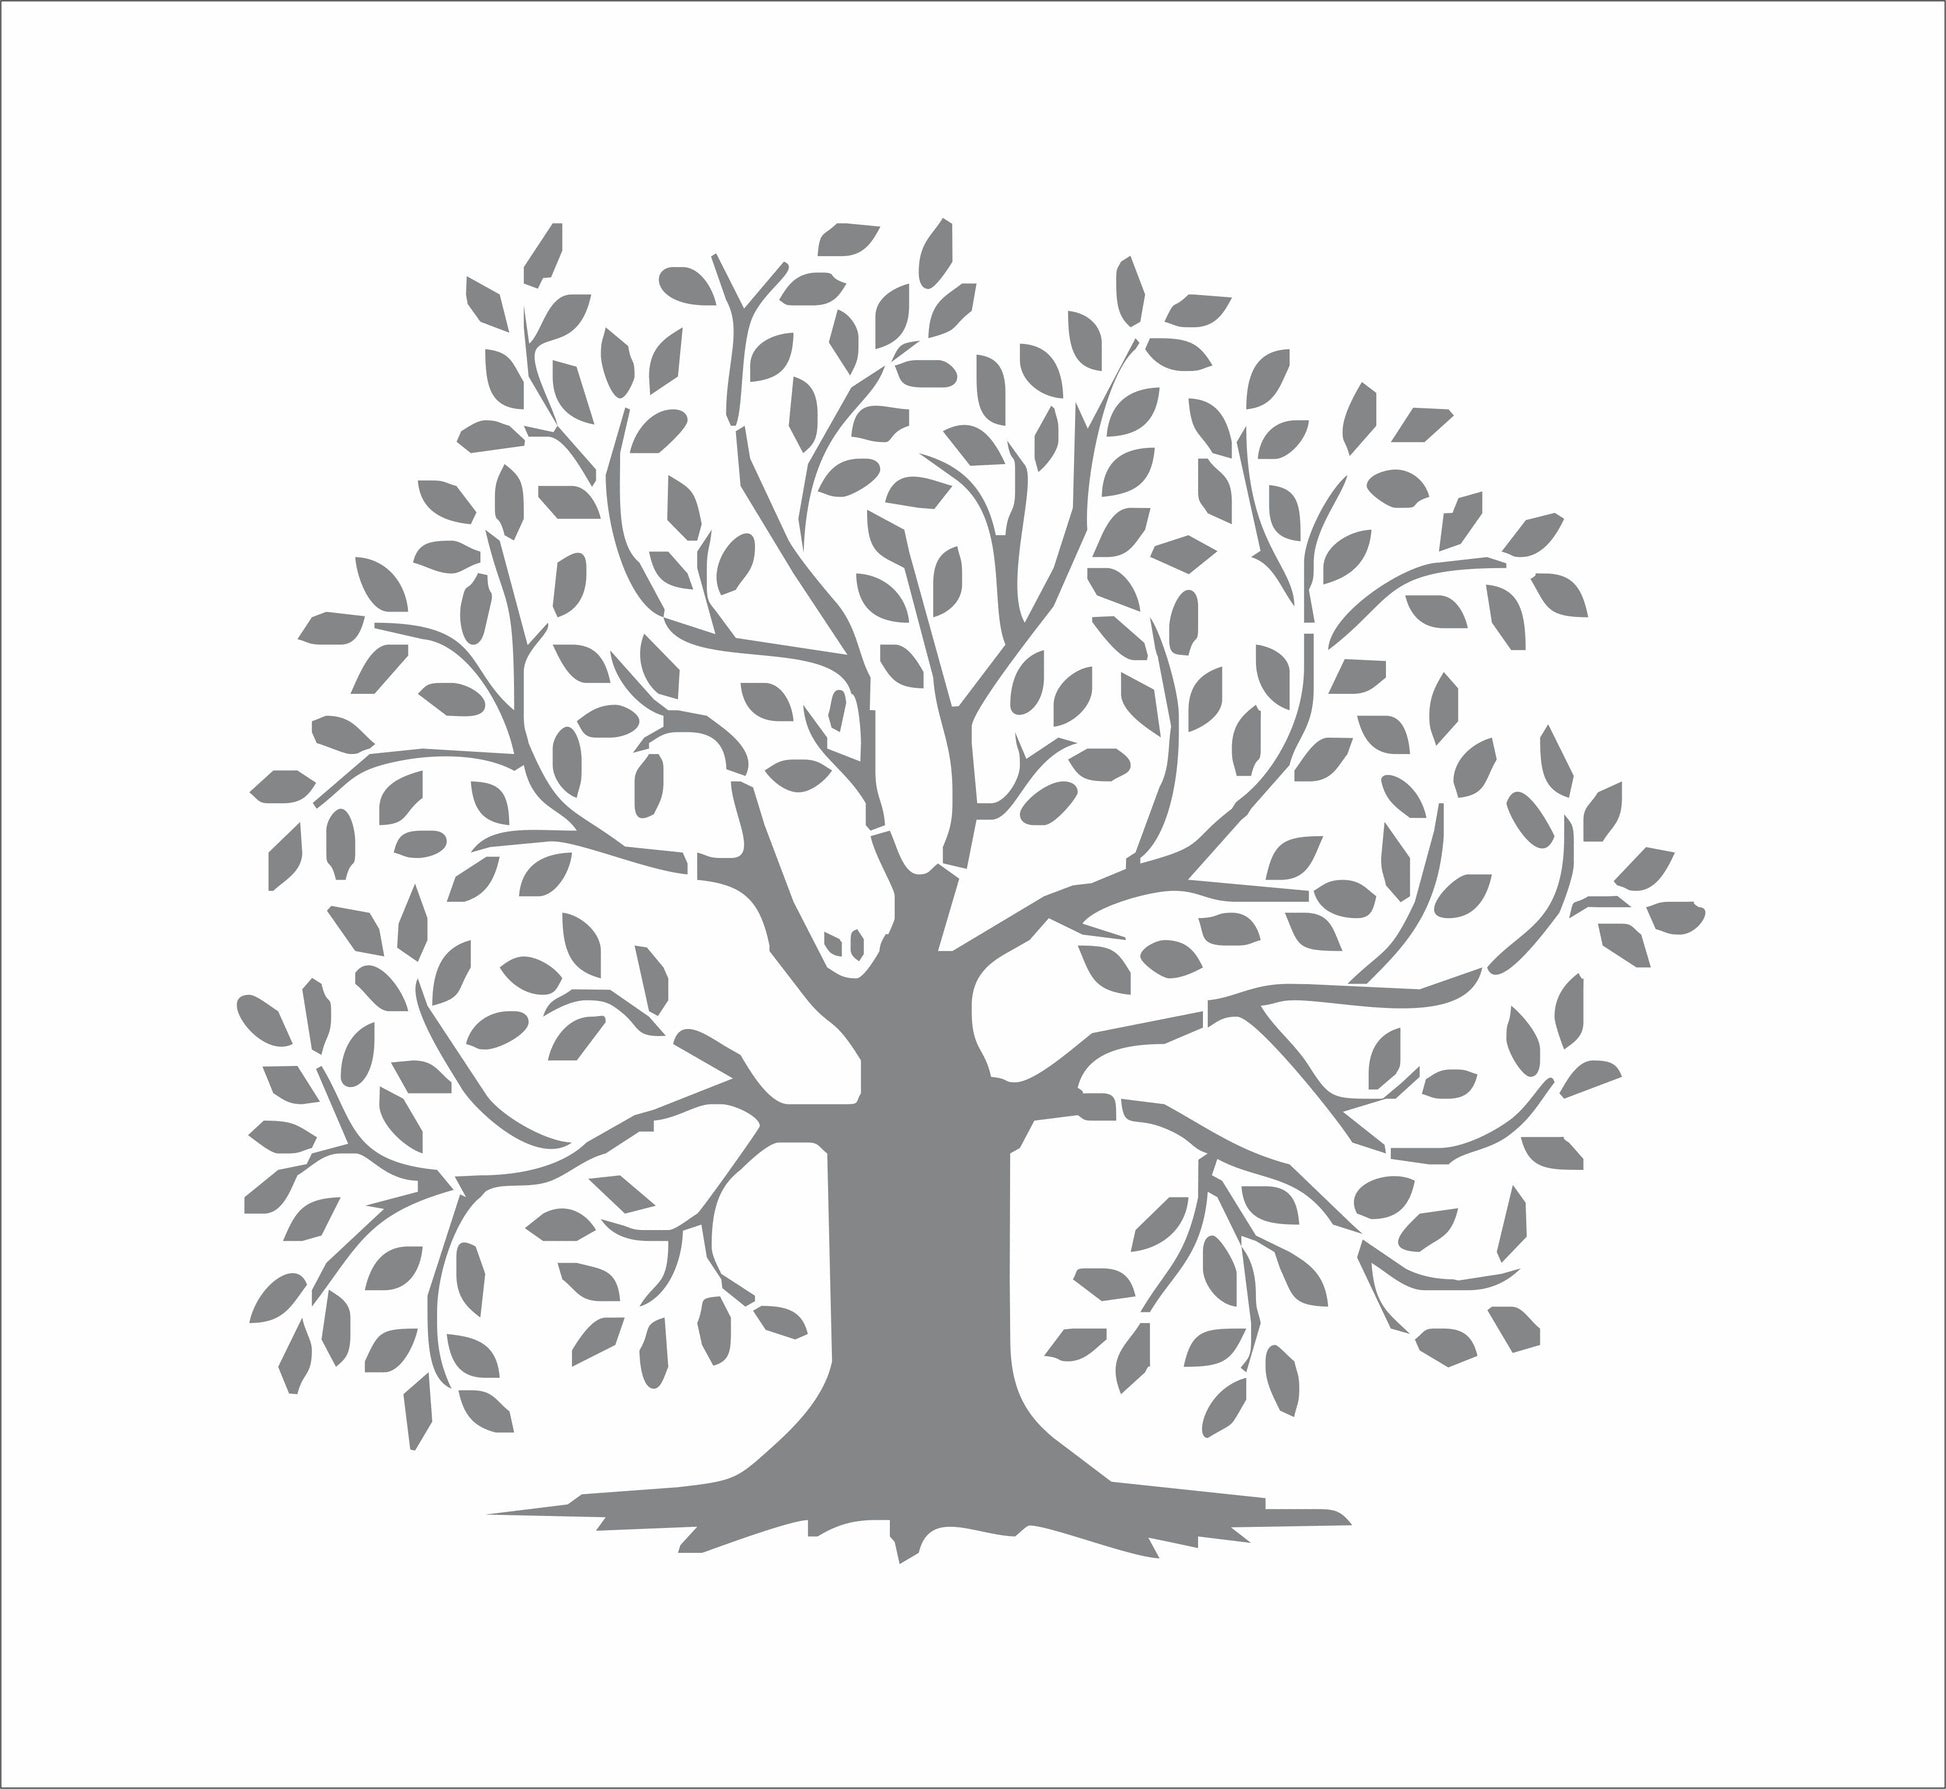 Family Tree Stencil - Like Branches on a tree Stencil - Create